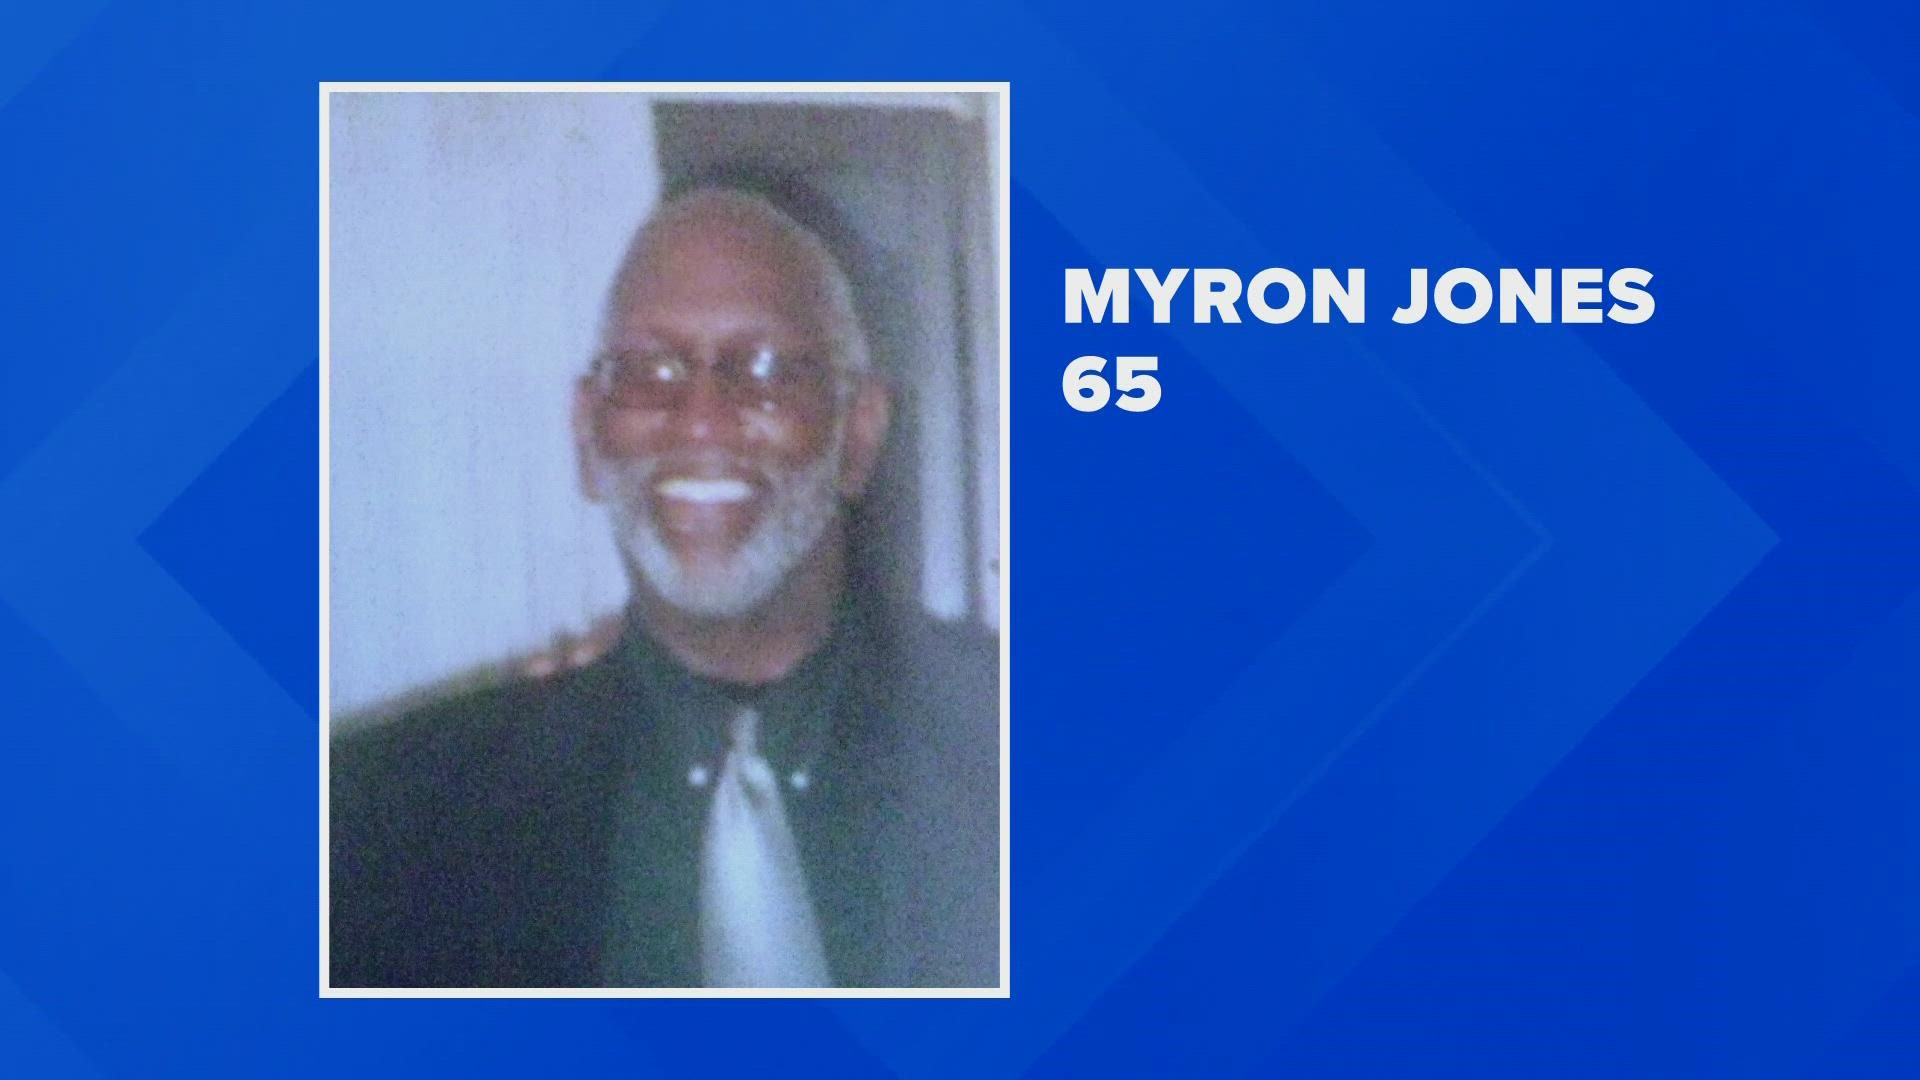 Myron Jones, 65, was among five people who were found dead, sparking investigation into the conditions at the senior living apartments.